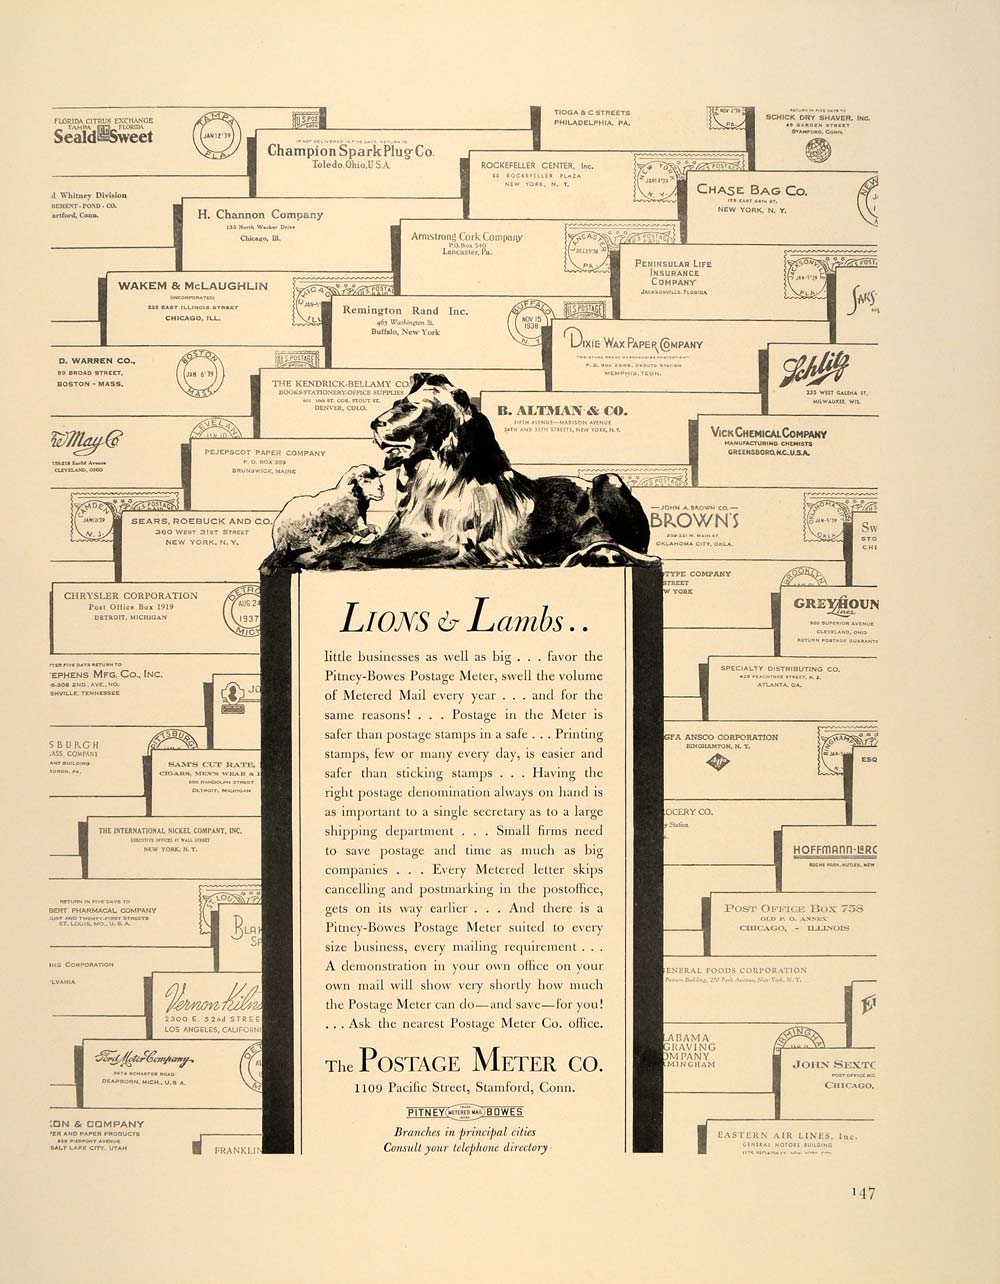 1939 Ad Pitney Bowes Postage Meter Co. Mail Lion Lamb - ORIGINAL ADVERTISING FT6